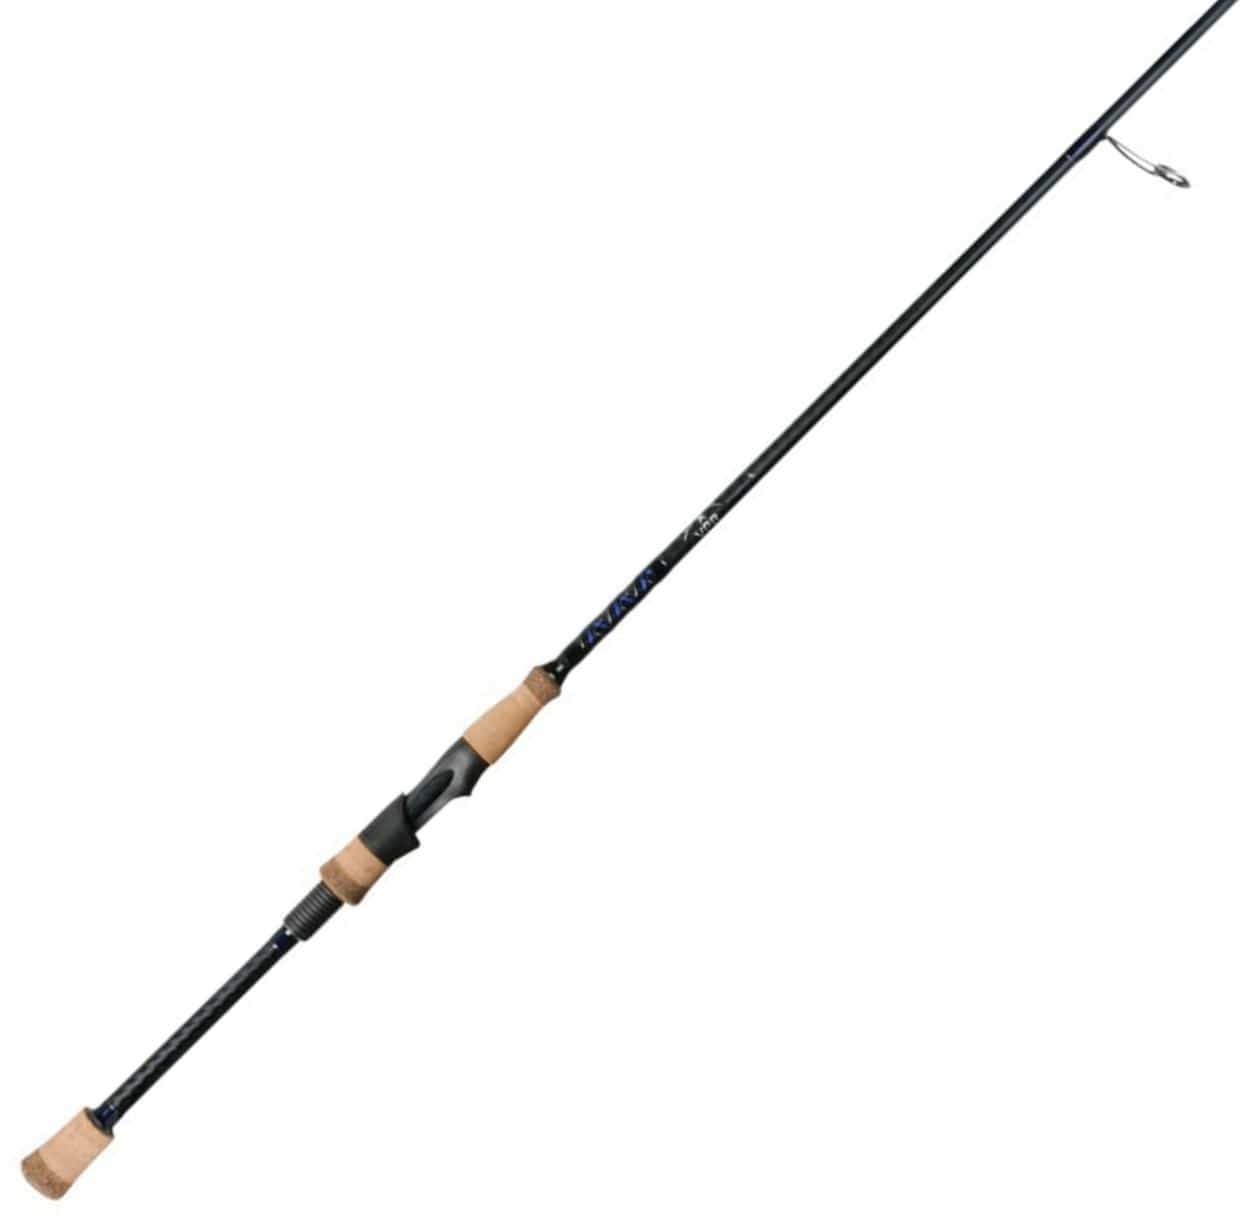 Light Tackle/Inshore Spinning Rods - The Saltwater Edge